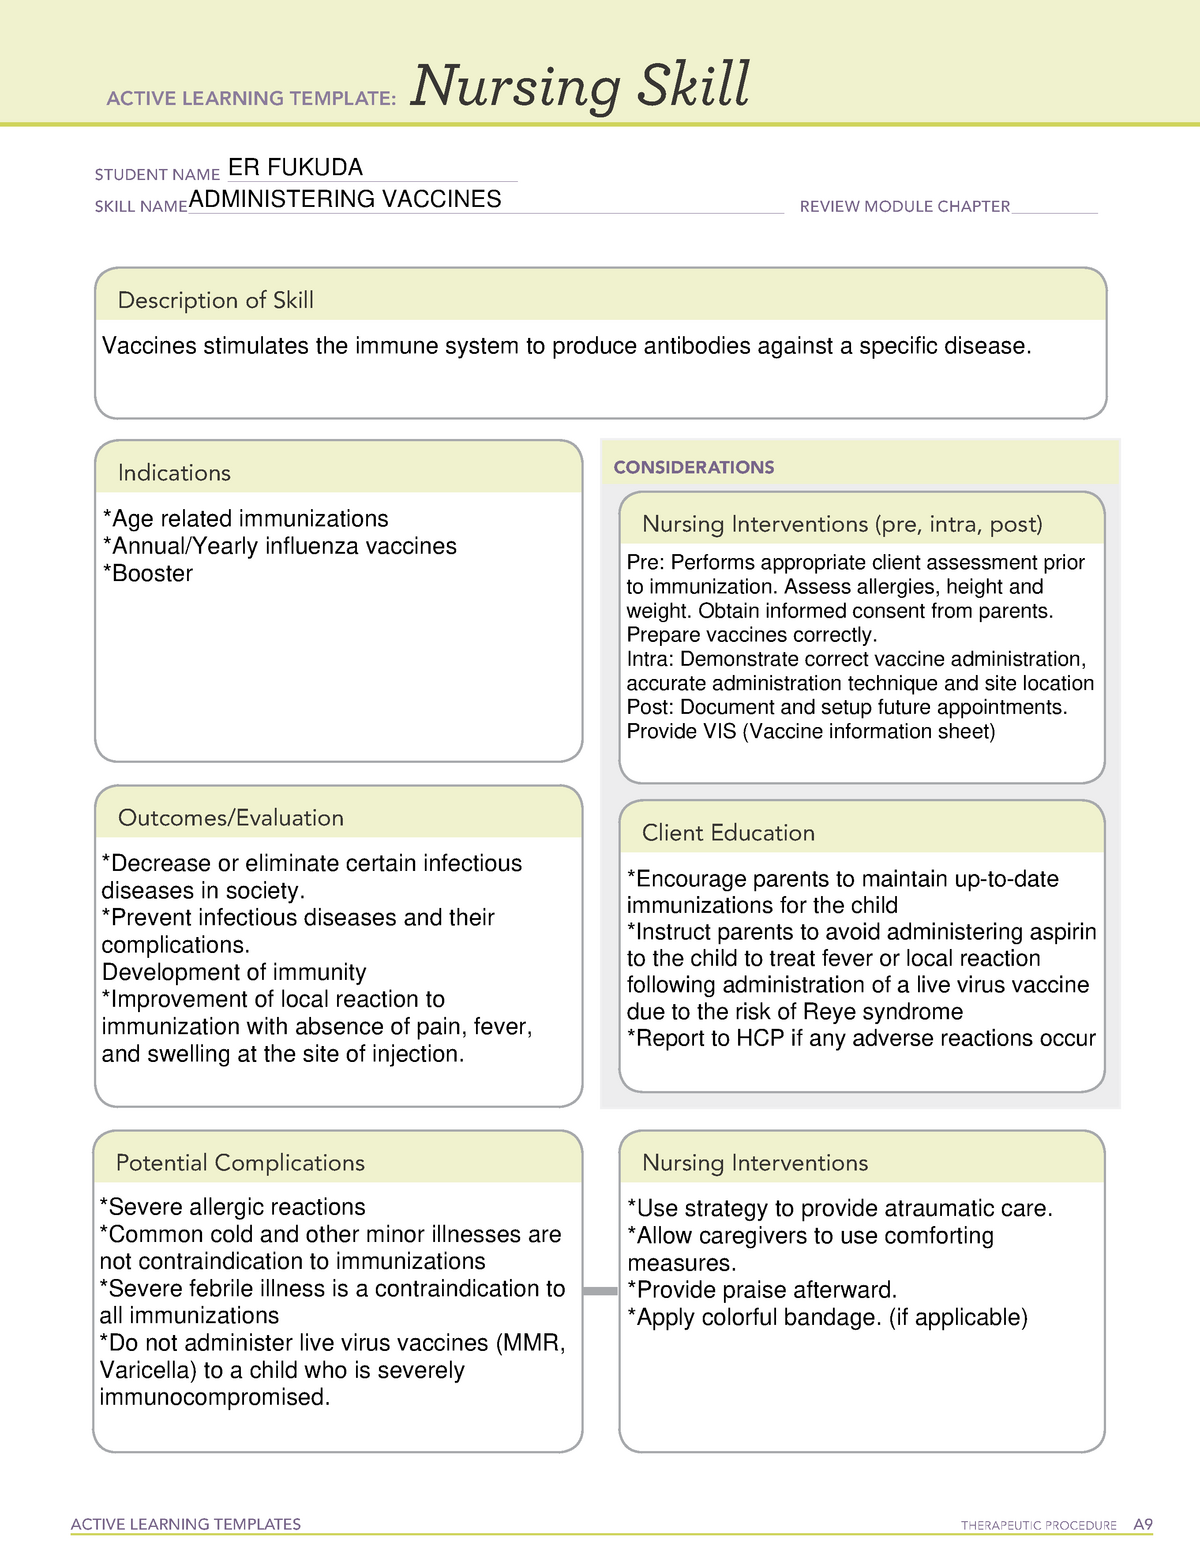 nursing-skill-active-learning-template